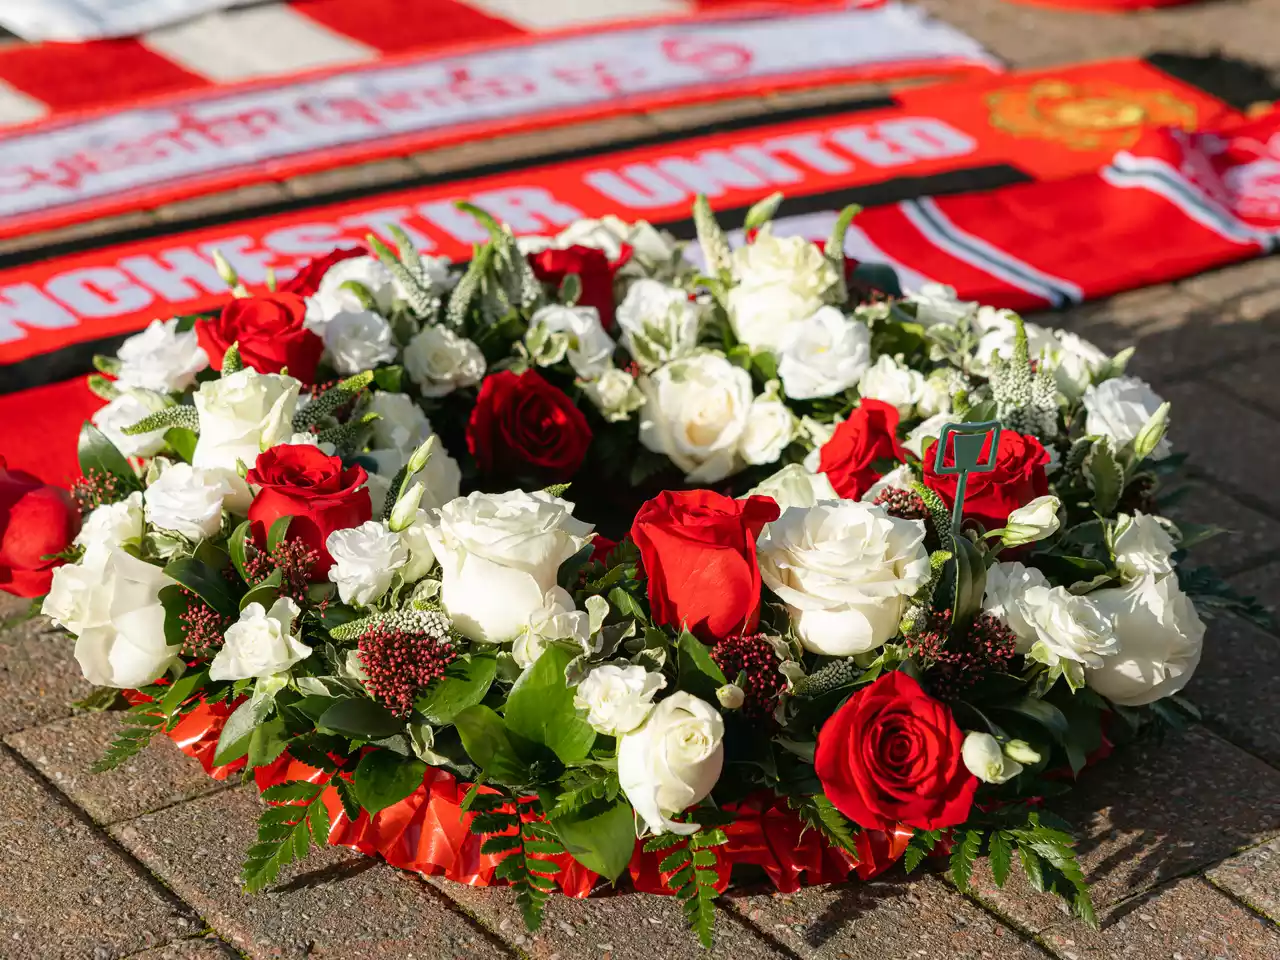 A wreath in tribute to Sir Bobby Charlton.